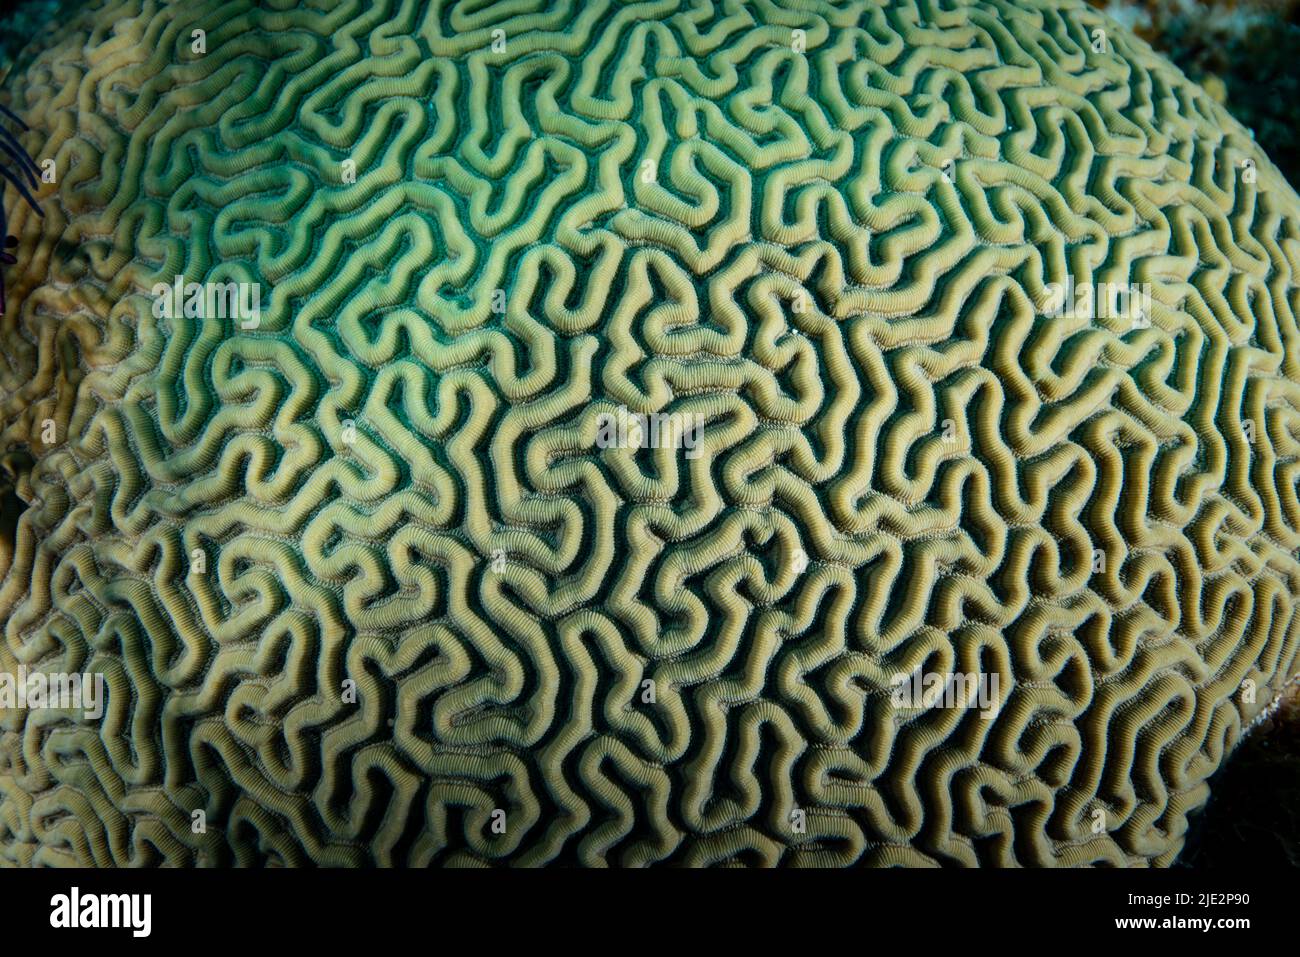 Brain coral on coral reef at Little Cayman Island in the Caribbean Stock Photo